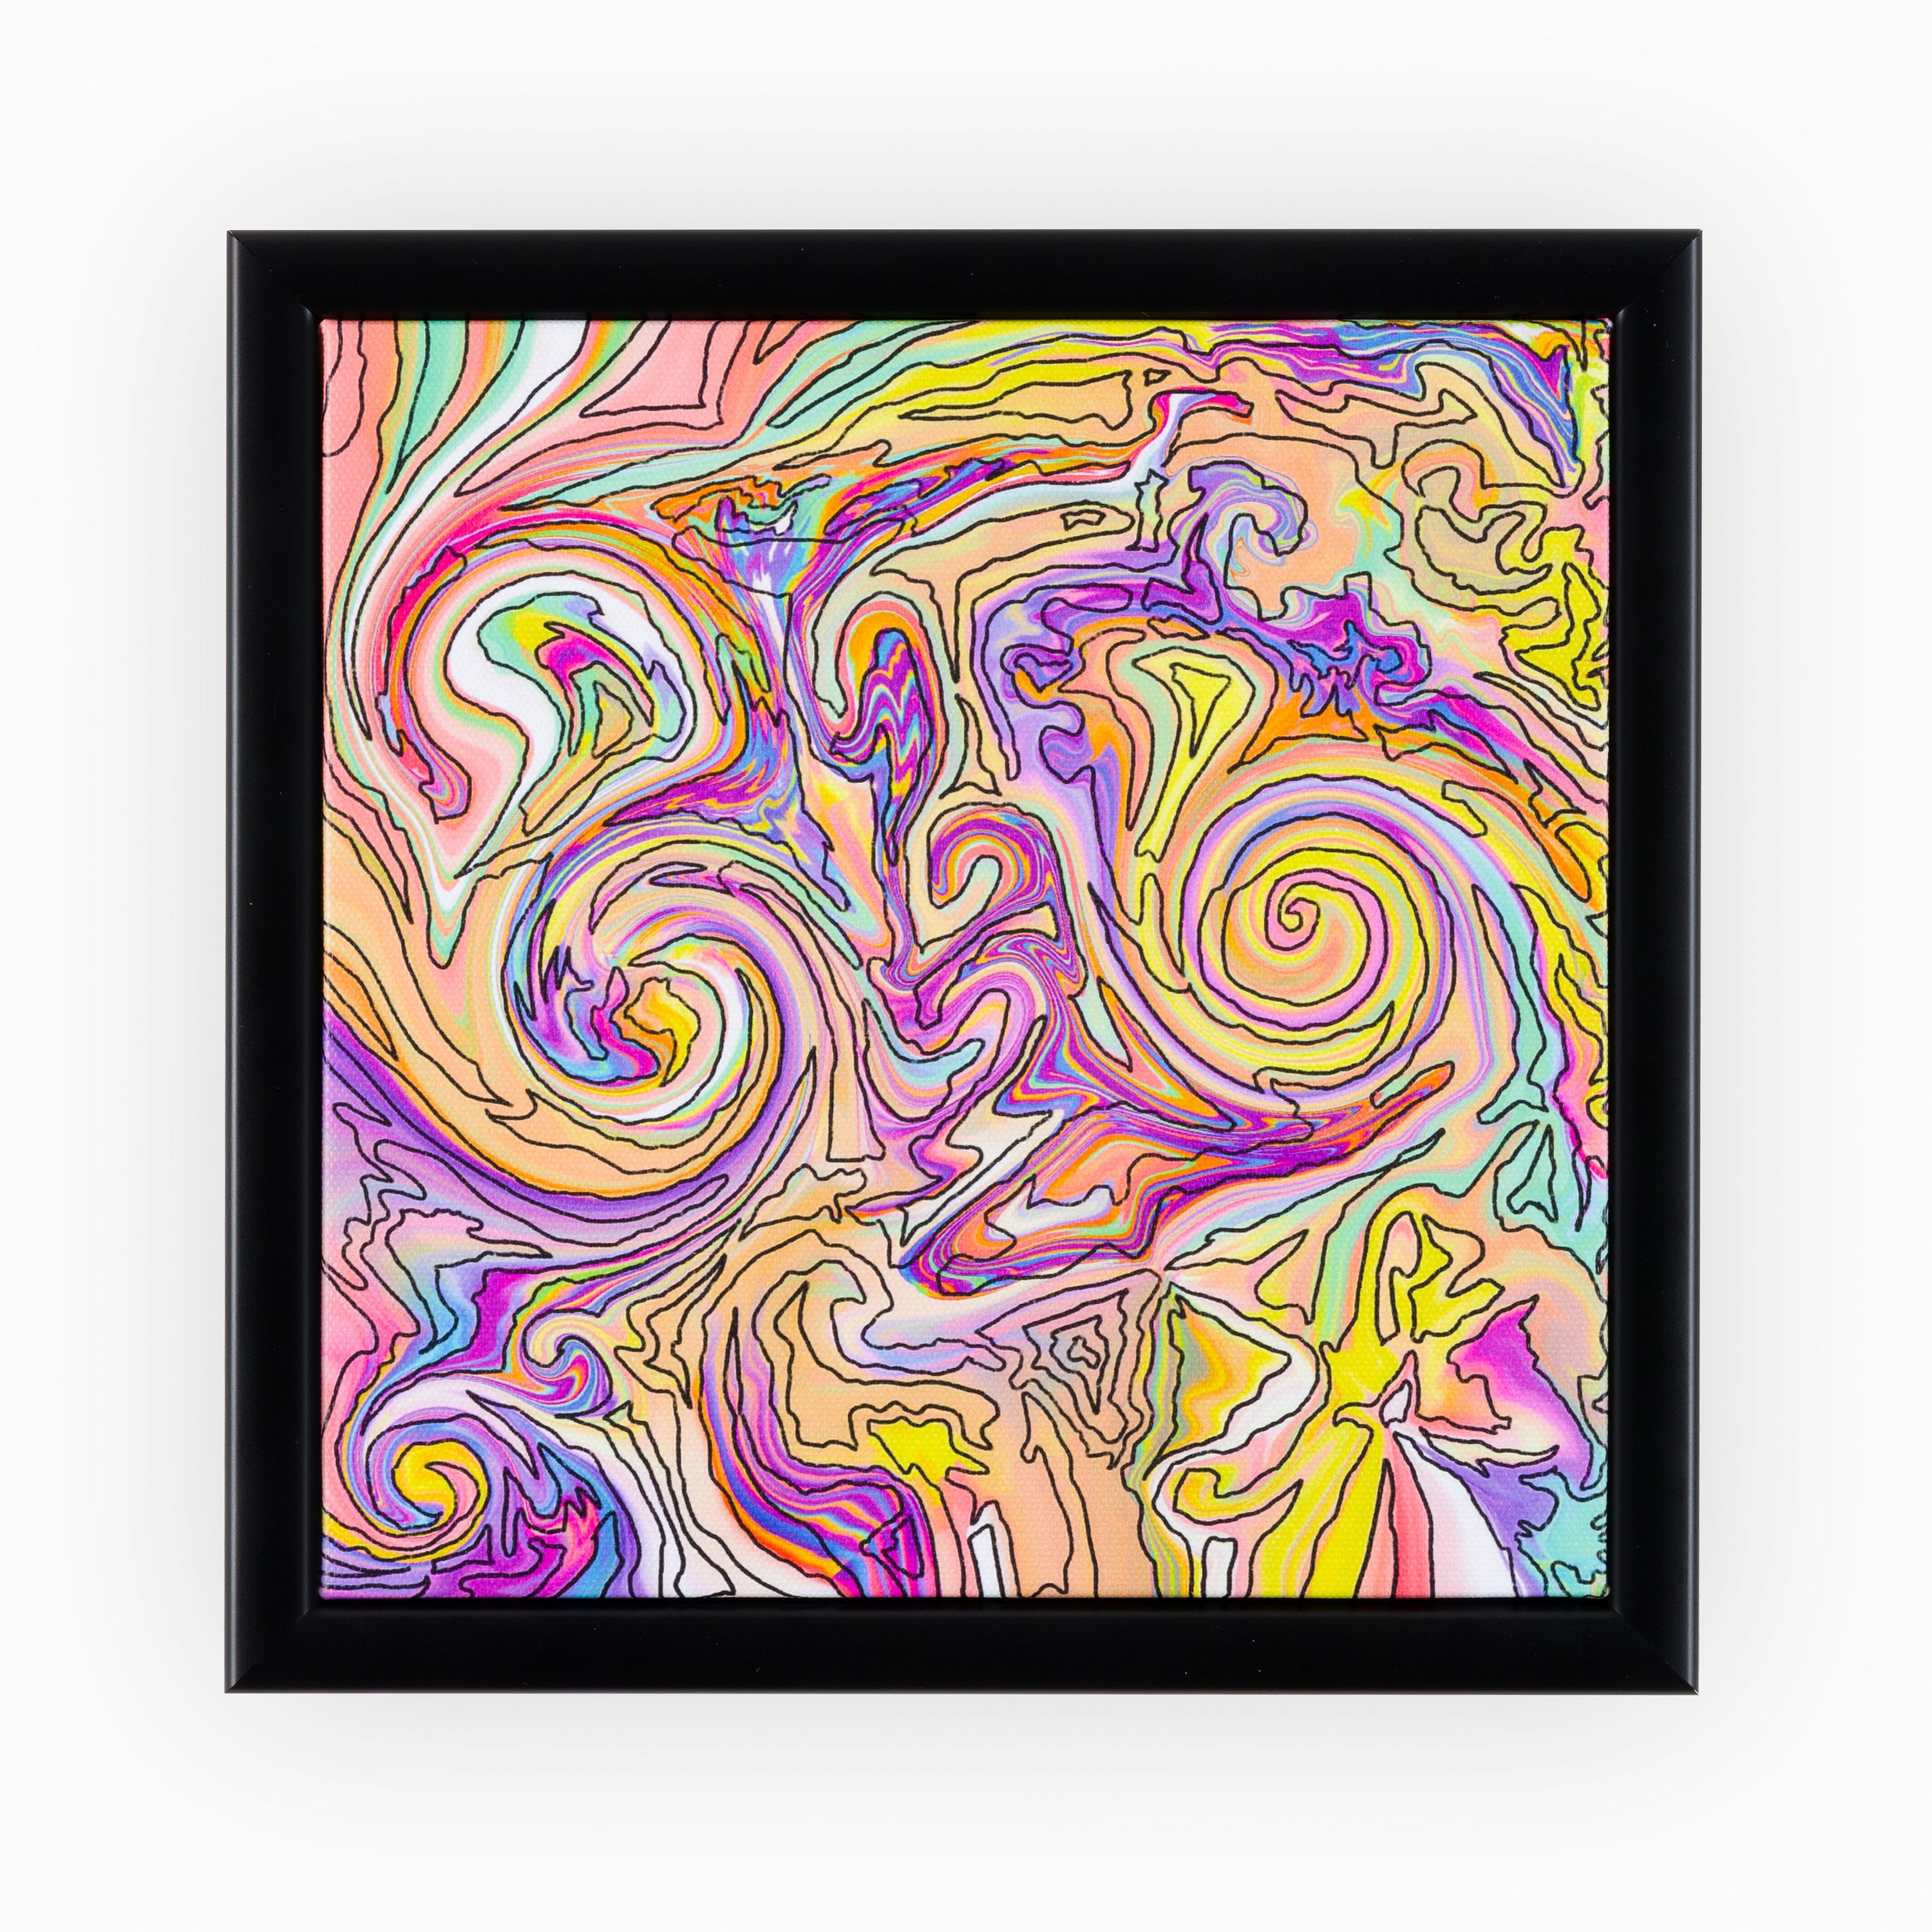 Luxury canvas in a black frame, featuring a vibrant digital print with swirling patterns in a kaleidoscope of colours, capturing the dynamic beauty of organised tumult.